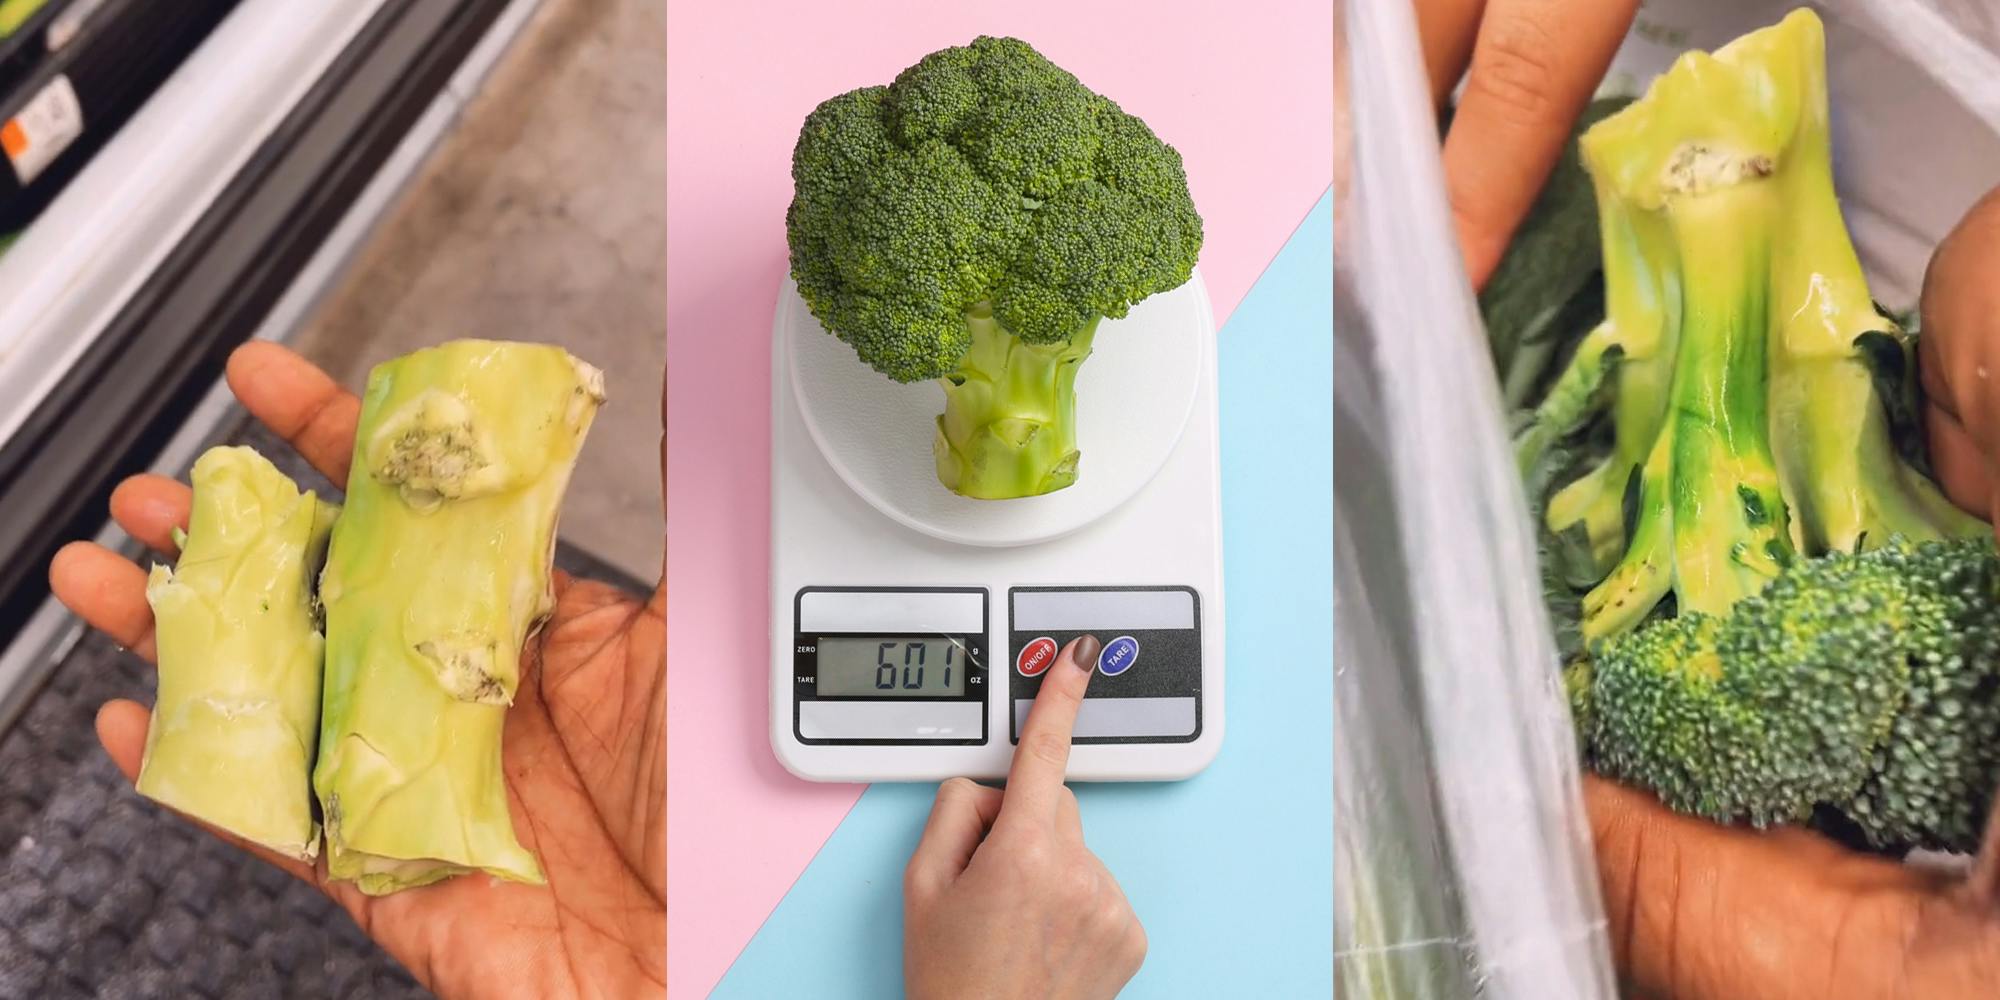 hand holding cut broccoli stems at grocery store (l) hand pressing button on scale while weighing broccoli on diagonal split pink to blue background (c) hand shuffling through bag of broccoli at grocery store, holding up piece that has stem cut (r)